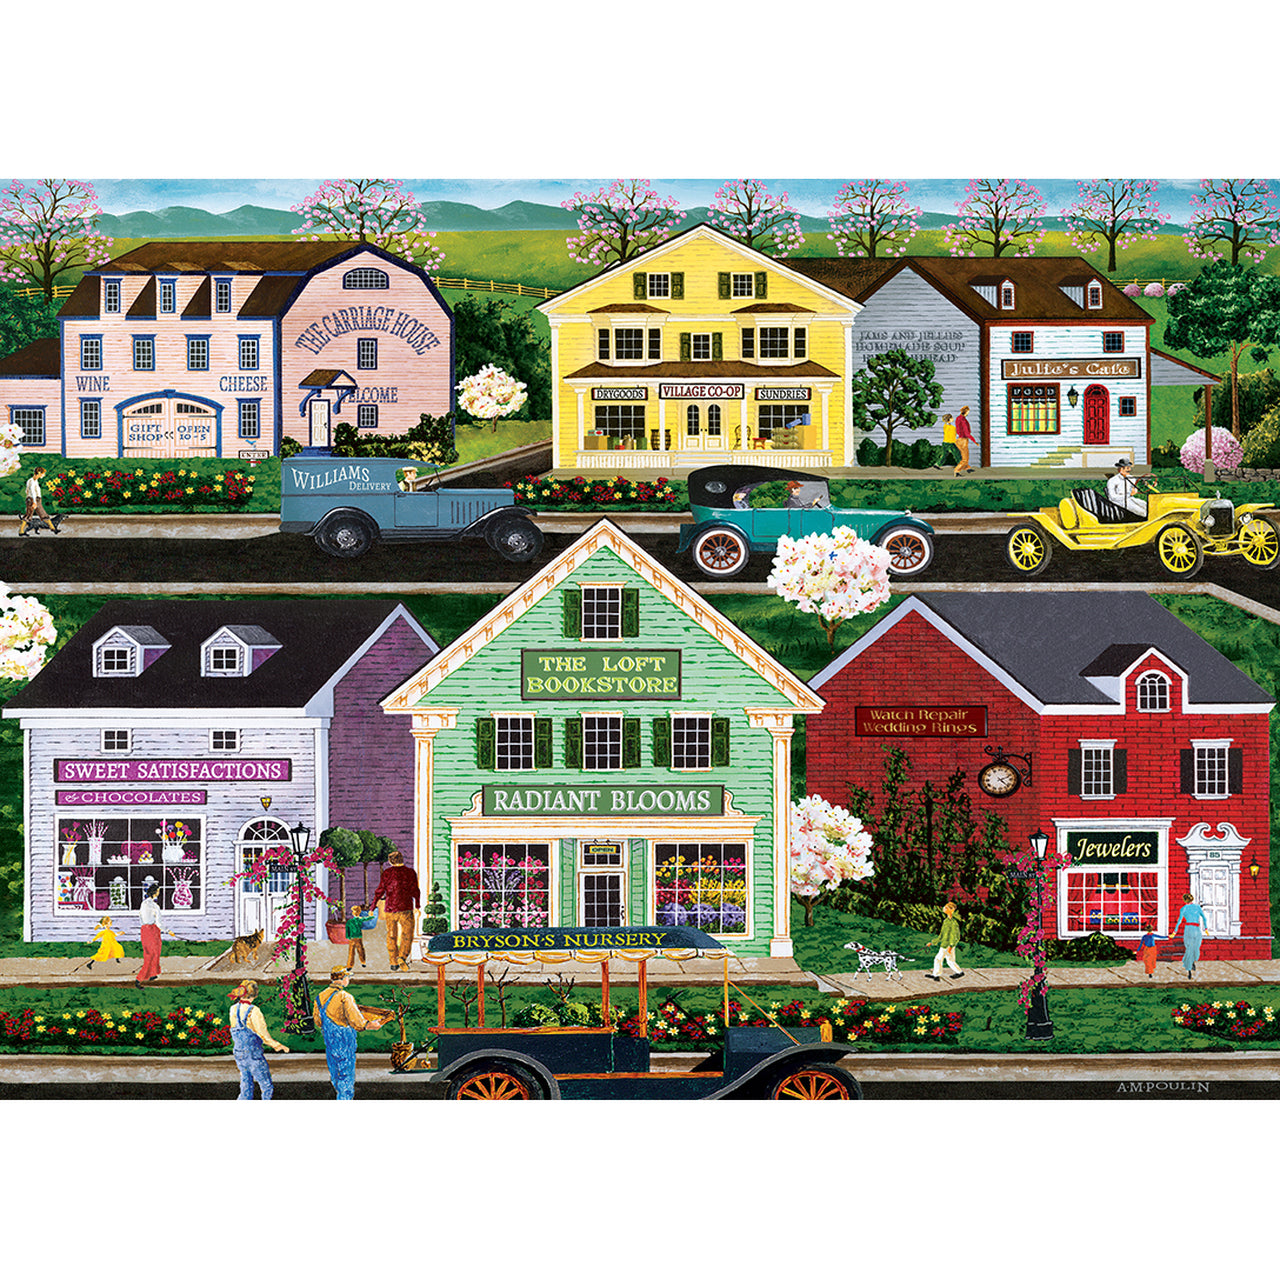 Brand-new A. M. Poulin Day Trip Jigsaw Puzzle. 1000 pieces of scenic bliss. Measures 19.25" x 26.75". Art by Gail Fraser. Crafted by Masterpieces.